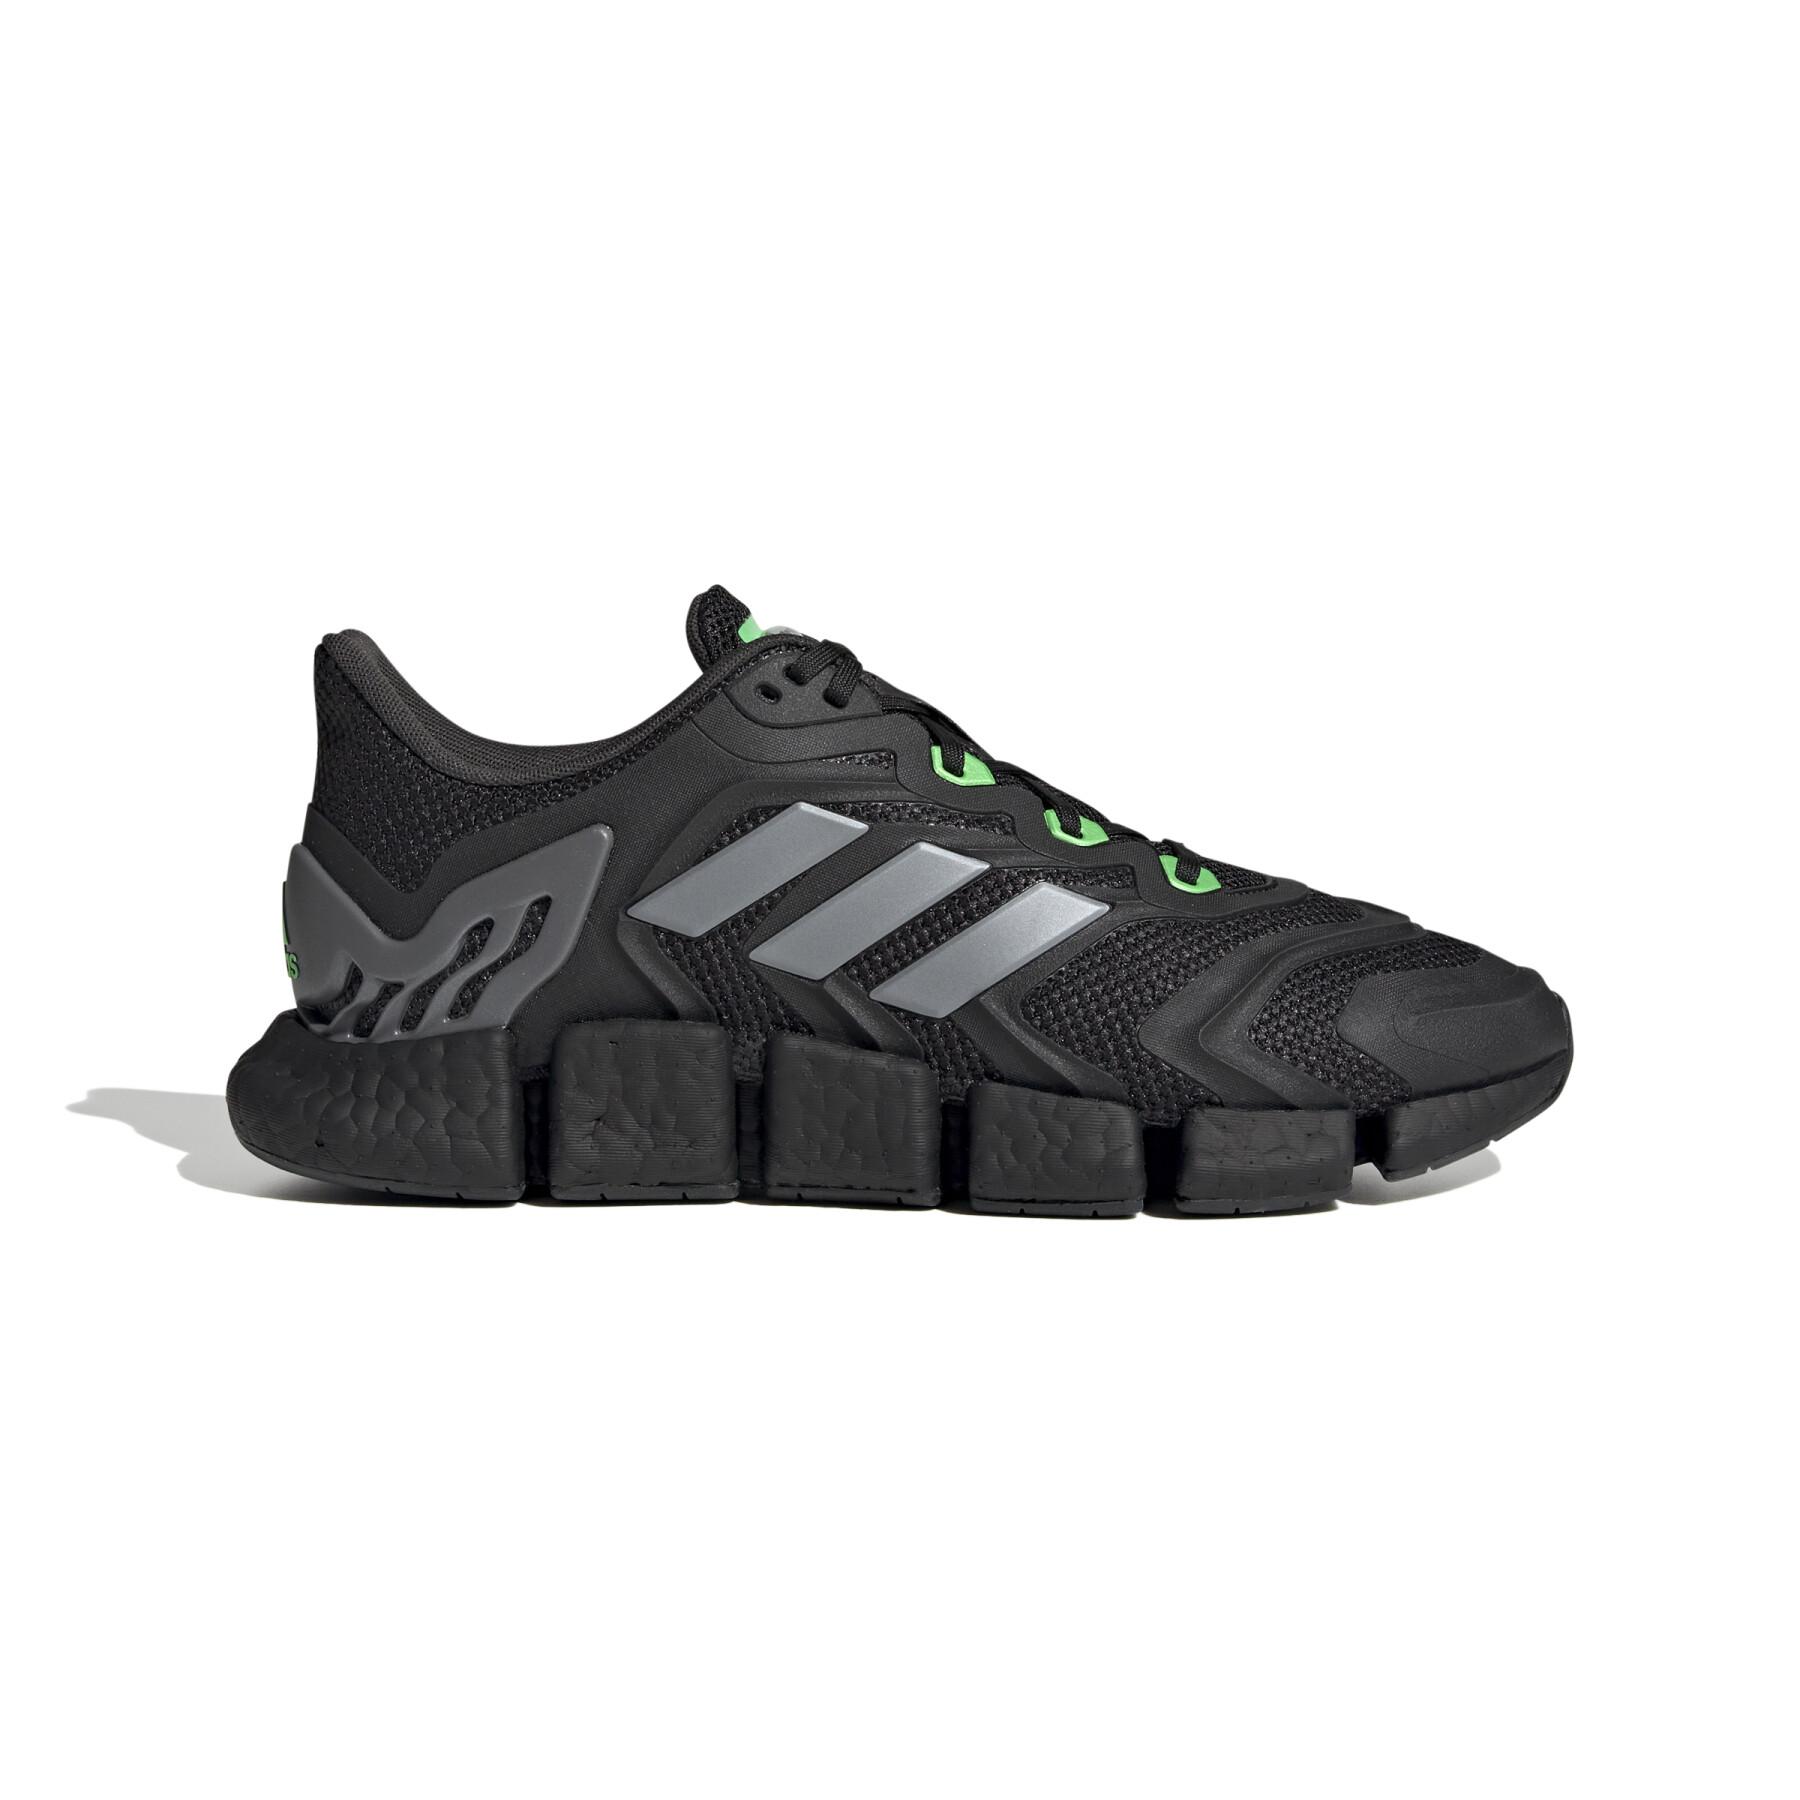 Chaussures de running adidas Climacool Vento